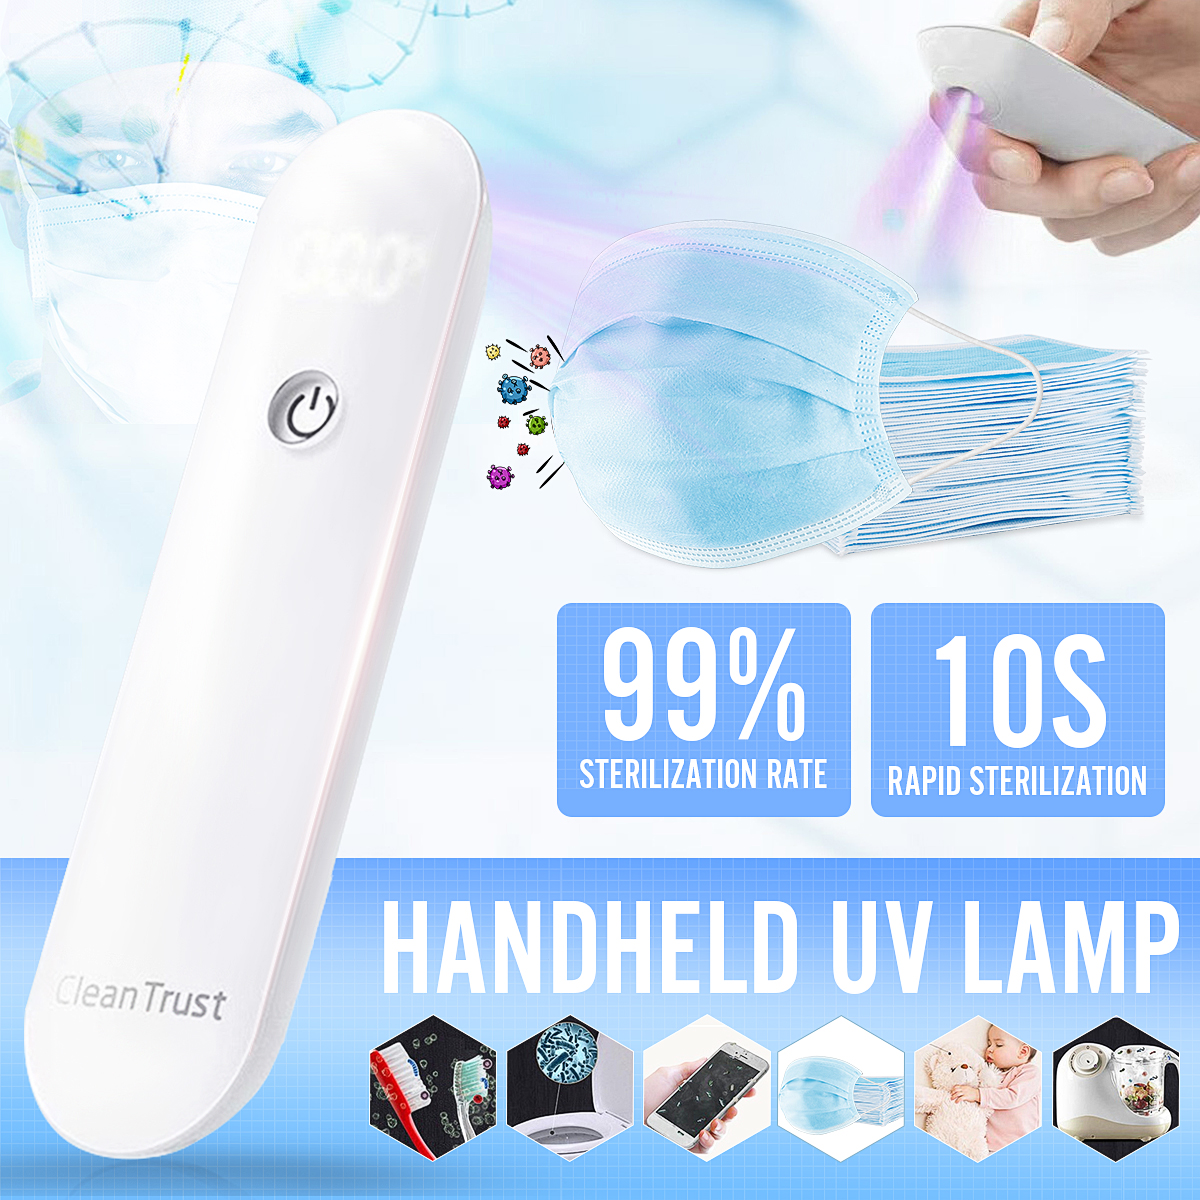 Portable-LED-UV-Sterilizer-Lamp-Disinfection-Handheld-For-Phones-Clothes-Bedding-1670454-1